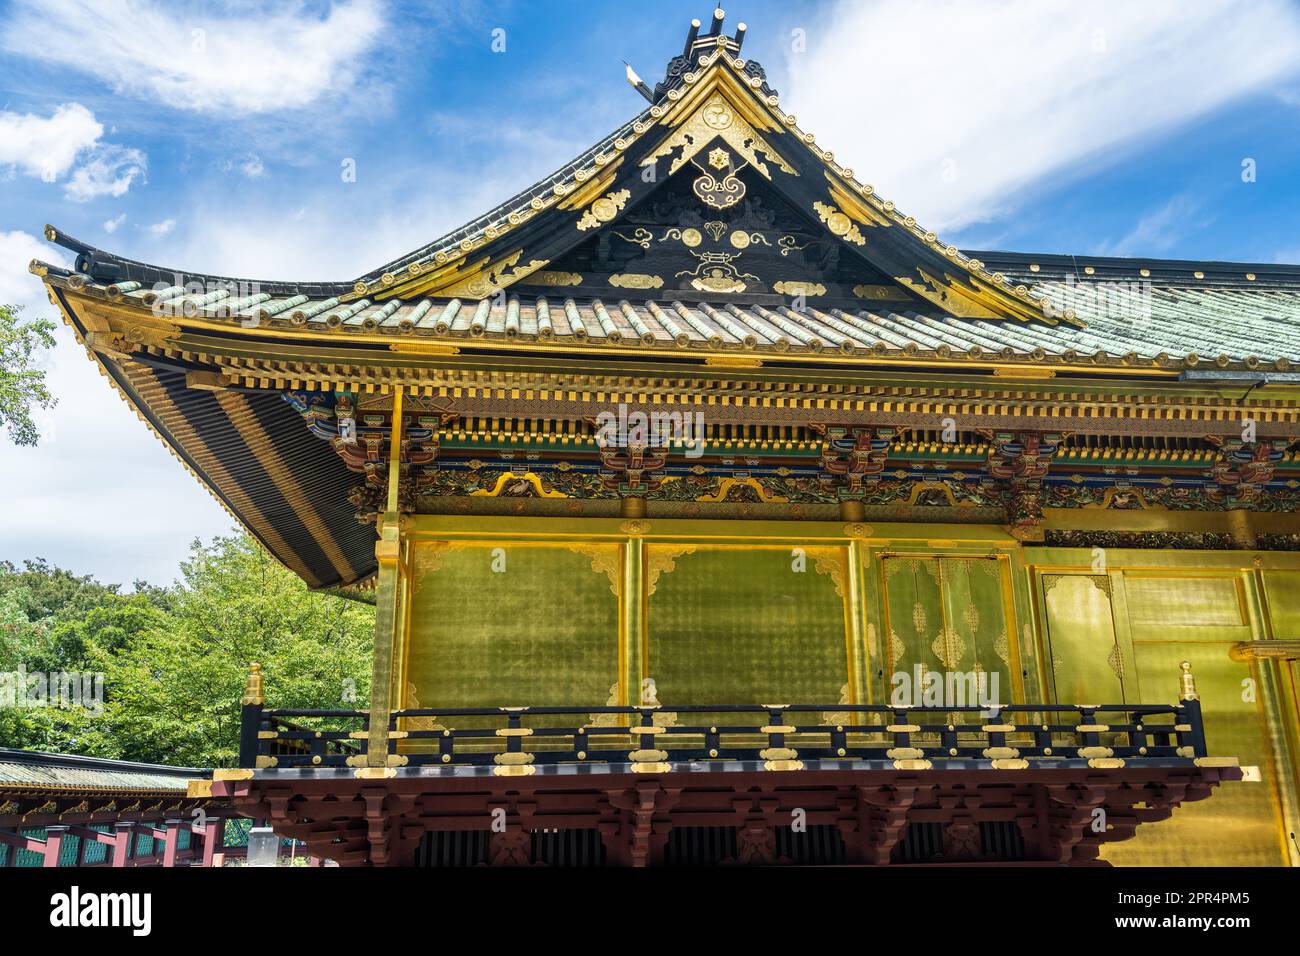 The Ueno Tosho-gu Shrine honden and Karamon in Ueno Park, Tokyo, Japan. The shrine was constructed in 1627 and is considered a great example of Shinto architecture from the Edo period. Stock Photo